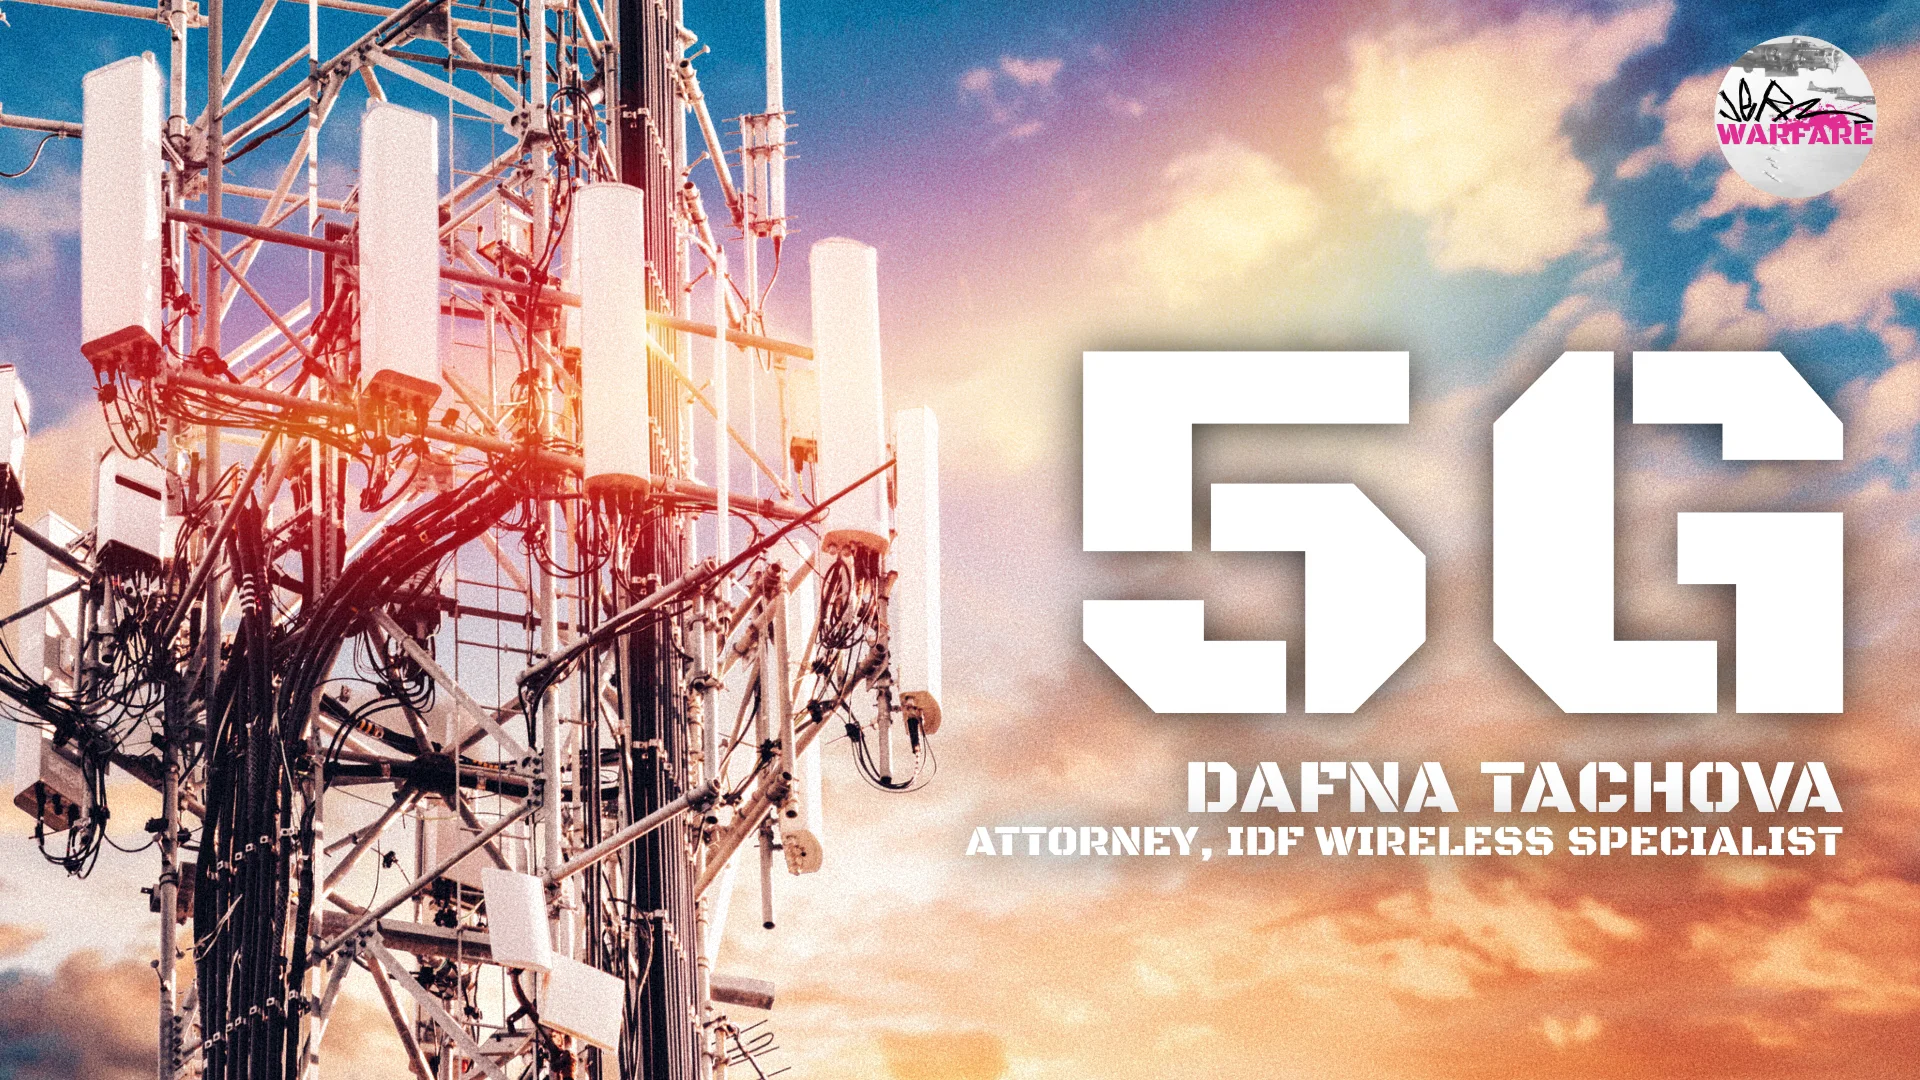 5G is not safe and it's about collecting our data - Dafna Tachover, telecoms specialist